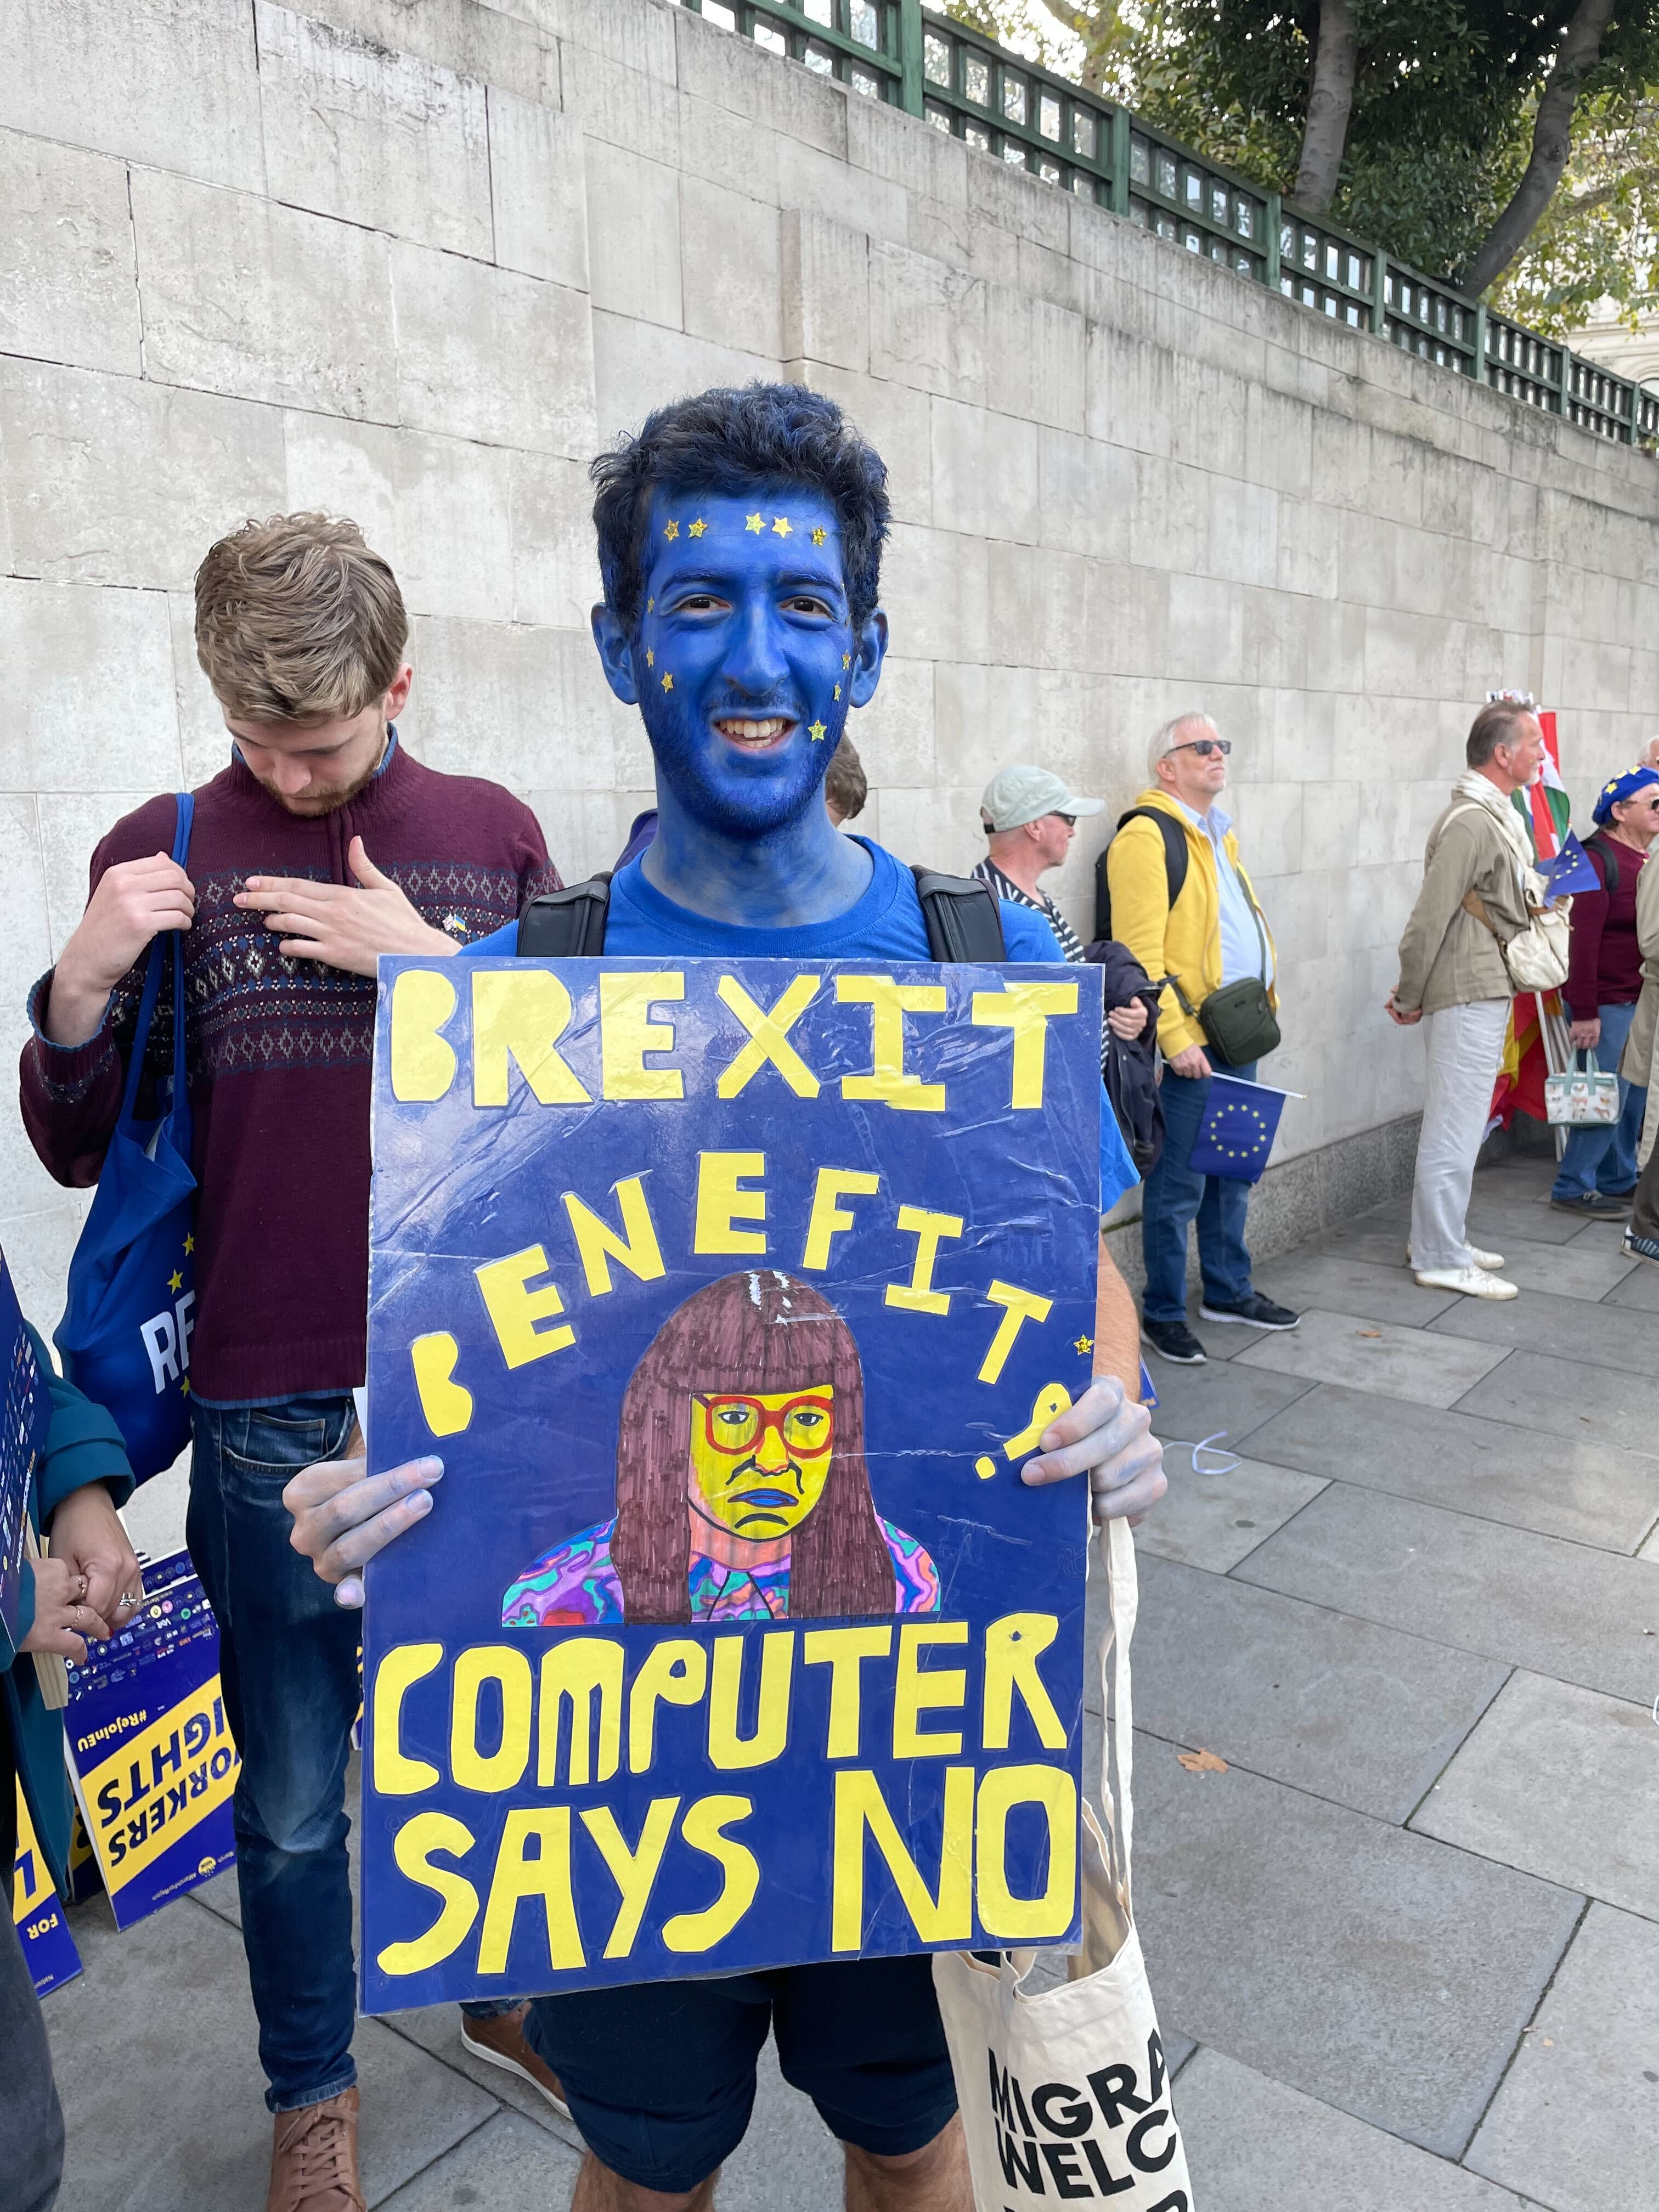 Eric Stoch, 23, north London, was painted head to toe in blue body paint for the march